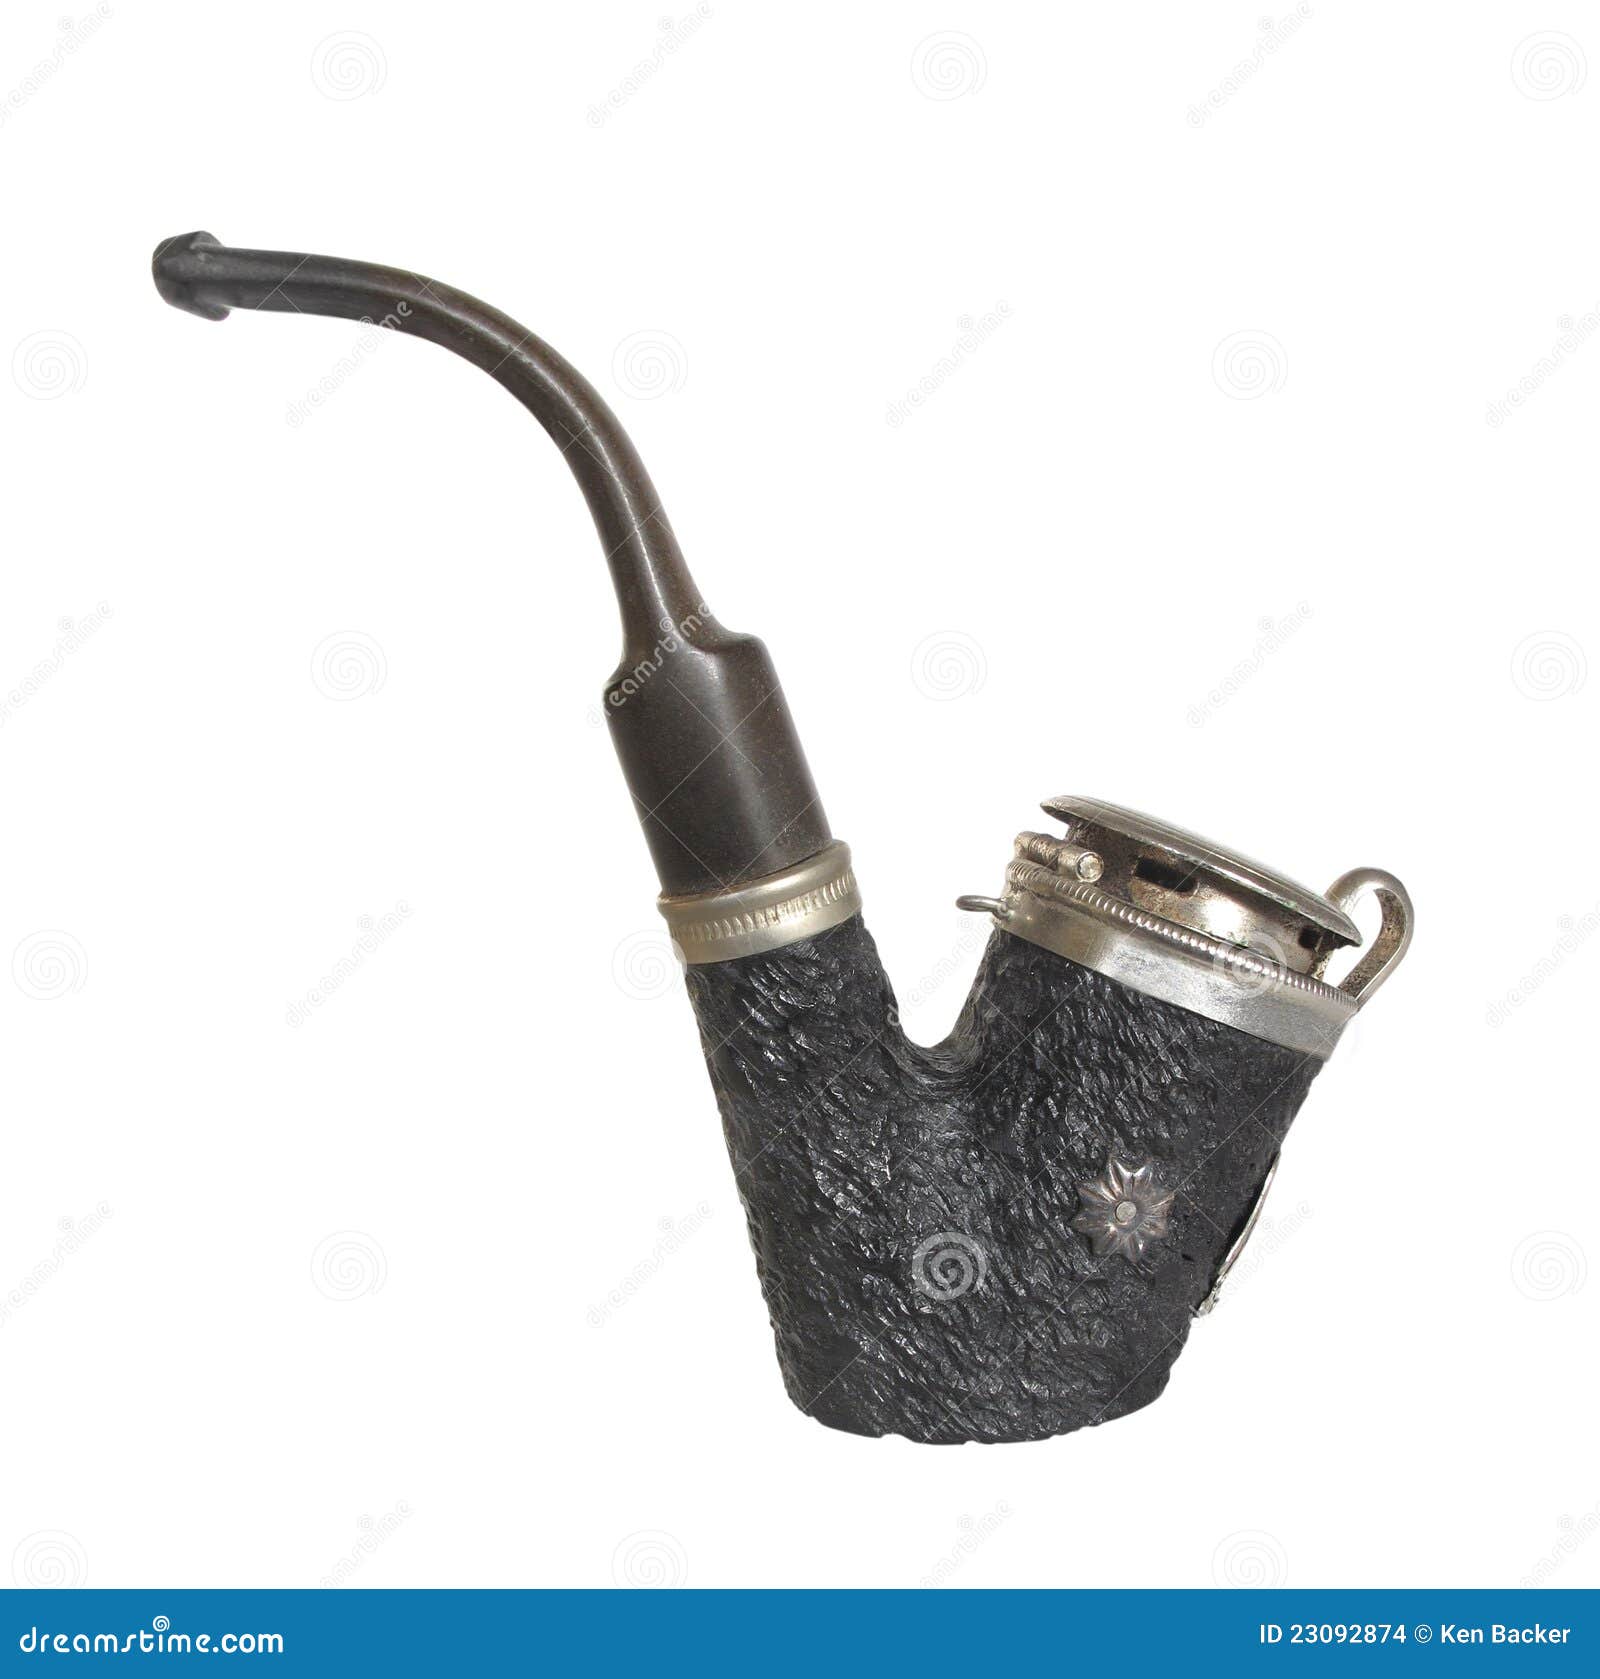 old-fancy-smoking-pipe-isolated-23092874.jpg